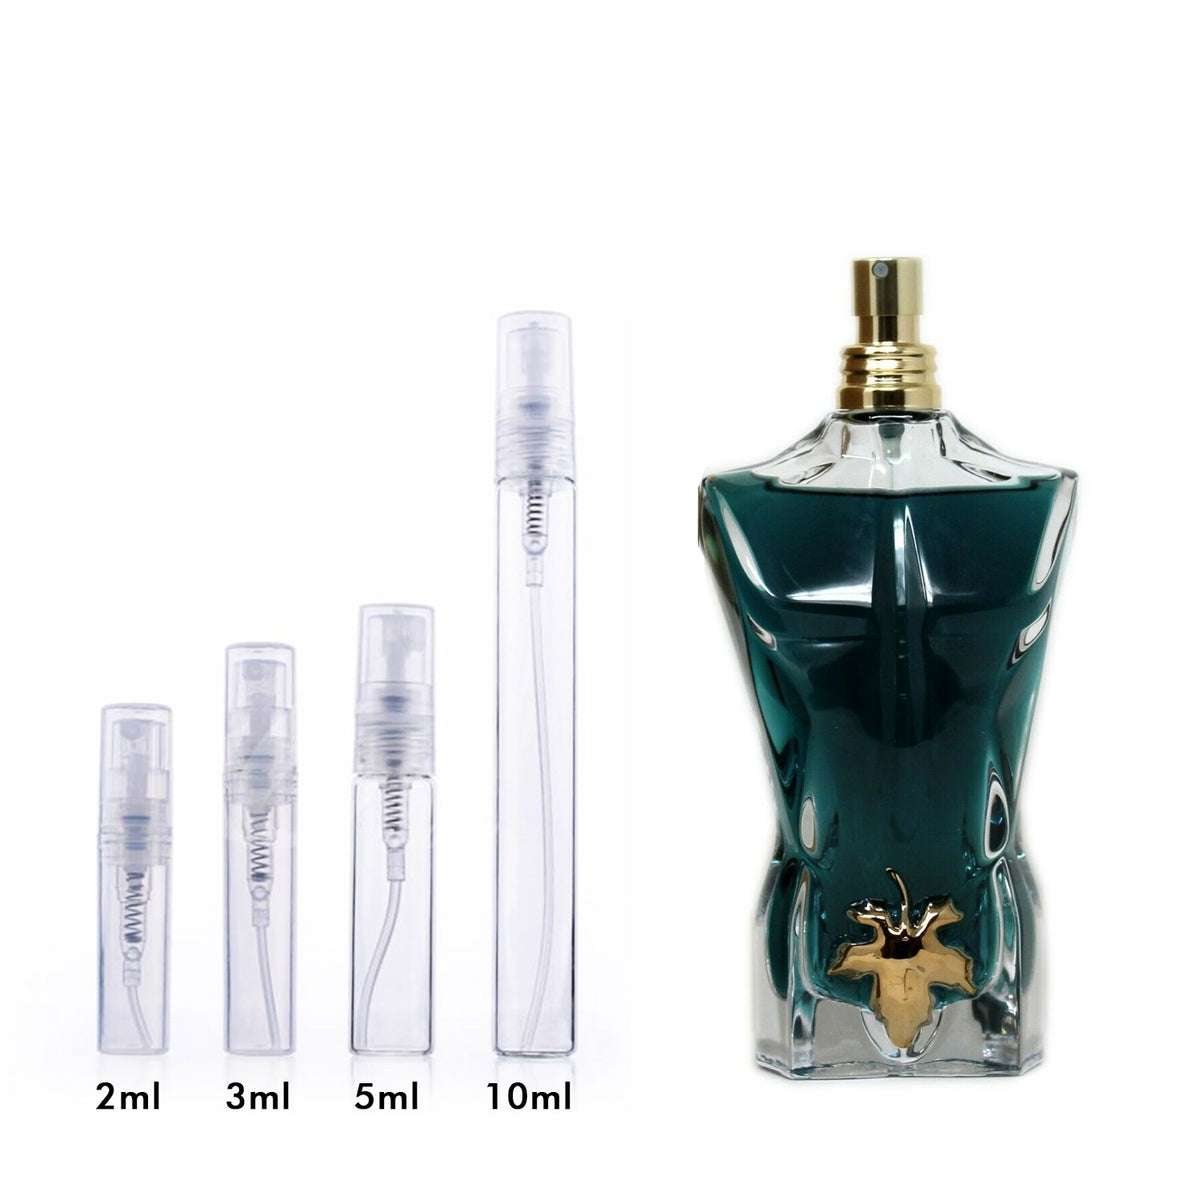 Shop for samples of Le Beau (Eau de Toilette) by Jean Paul Gaultier for men  rebottled and repacked by